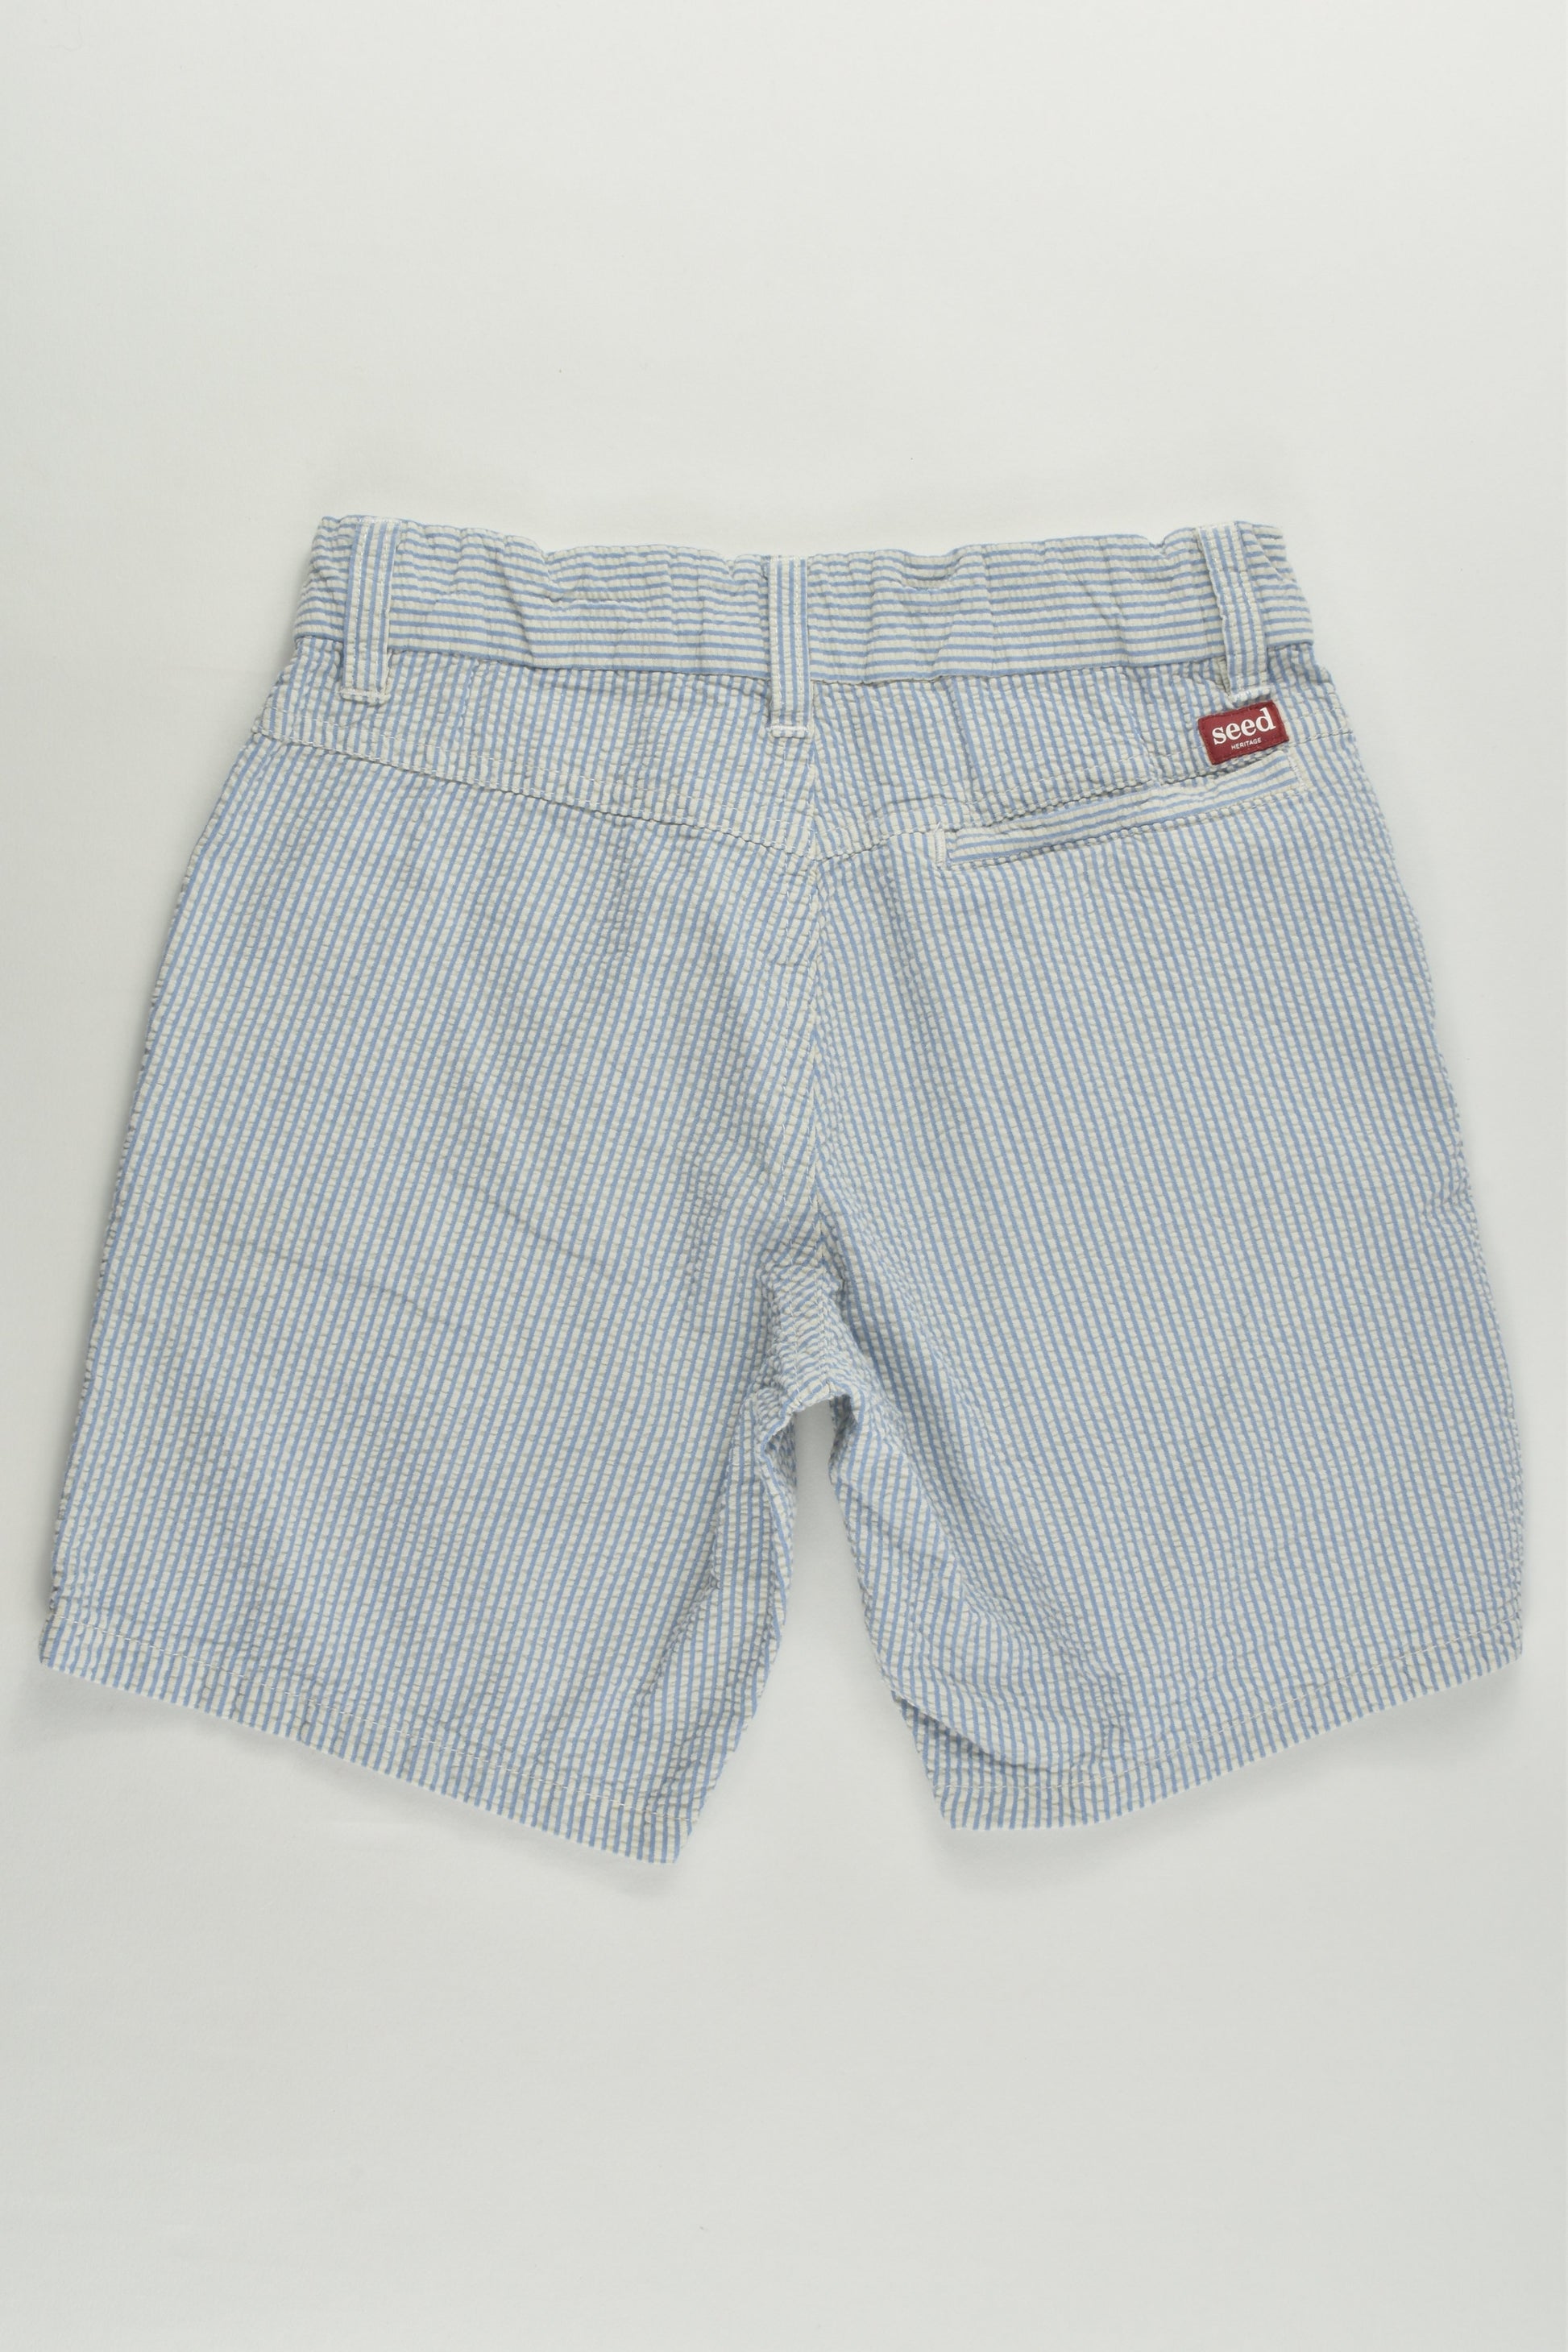 Seed Heritage Size 5-6 Striped Shorts